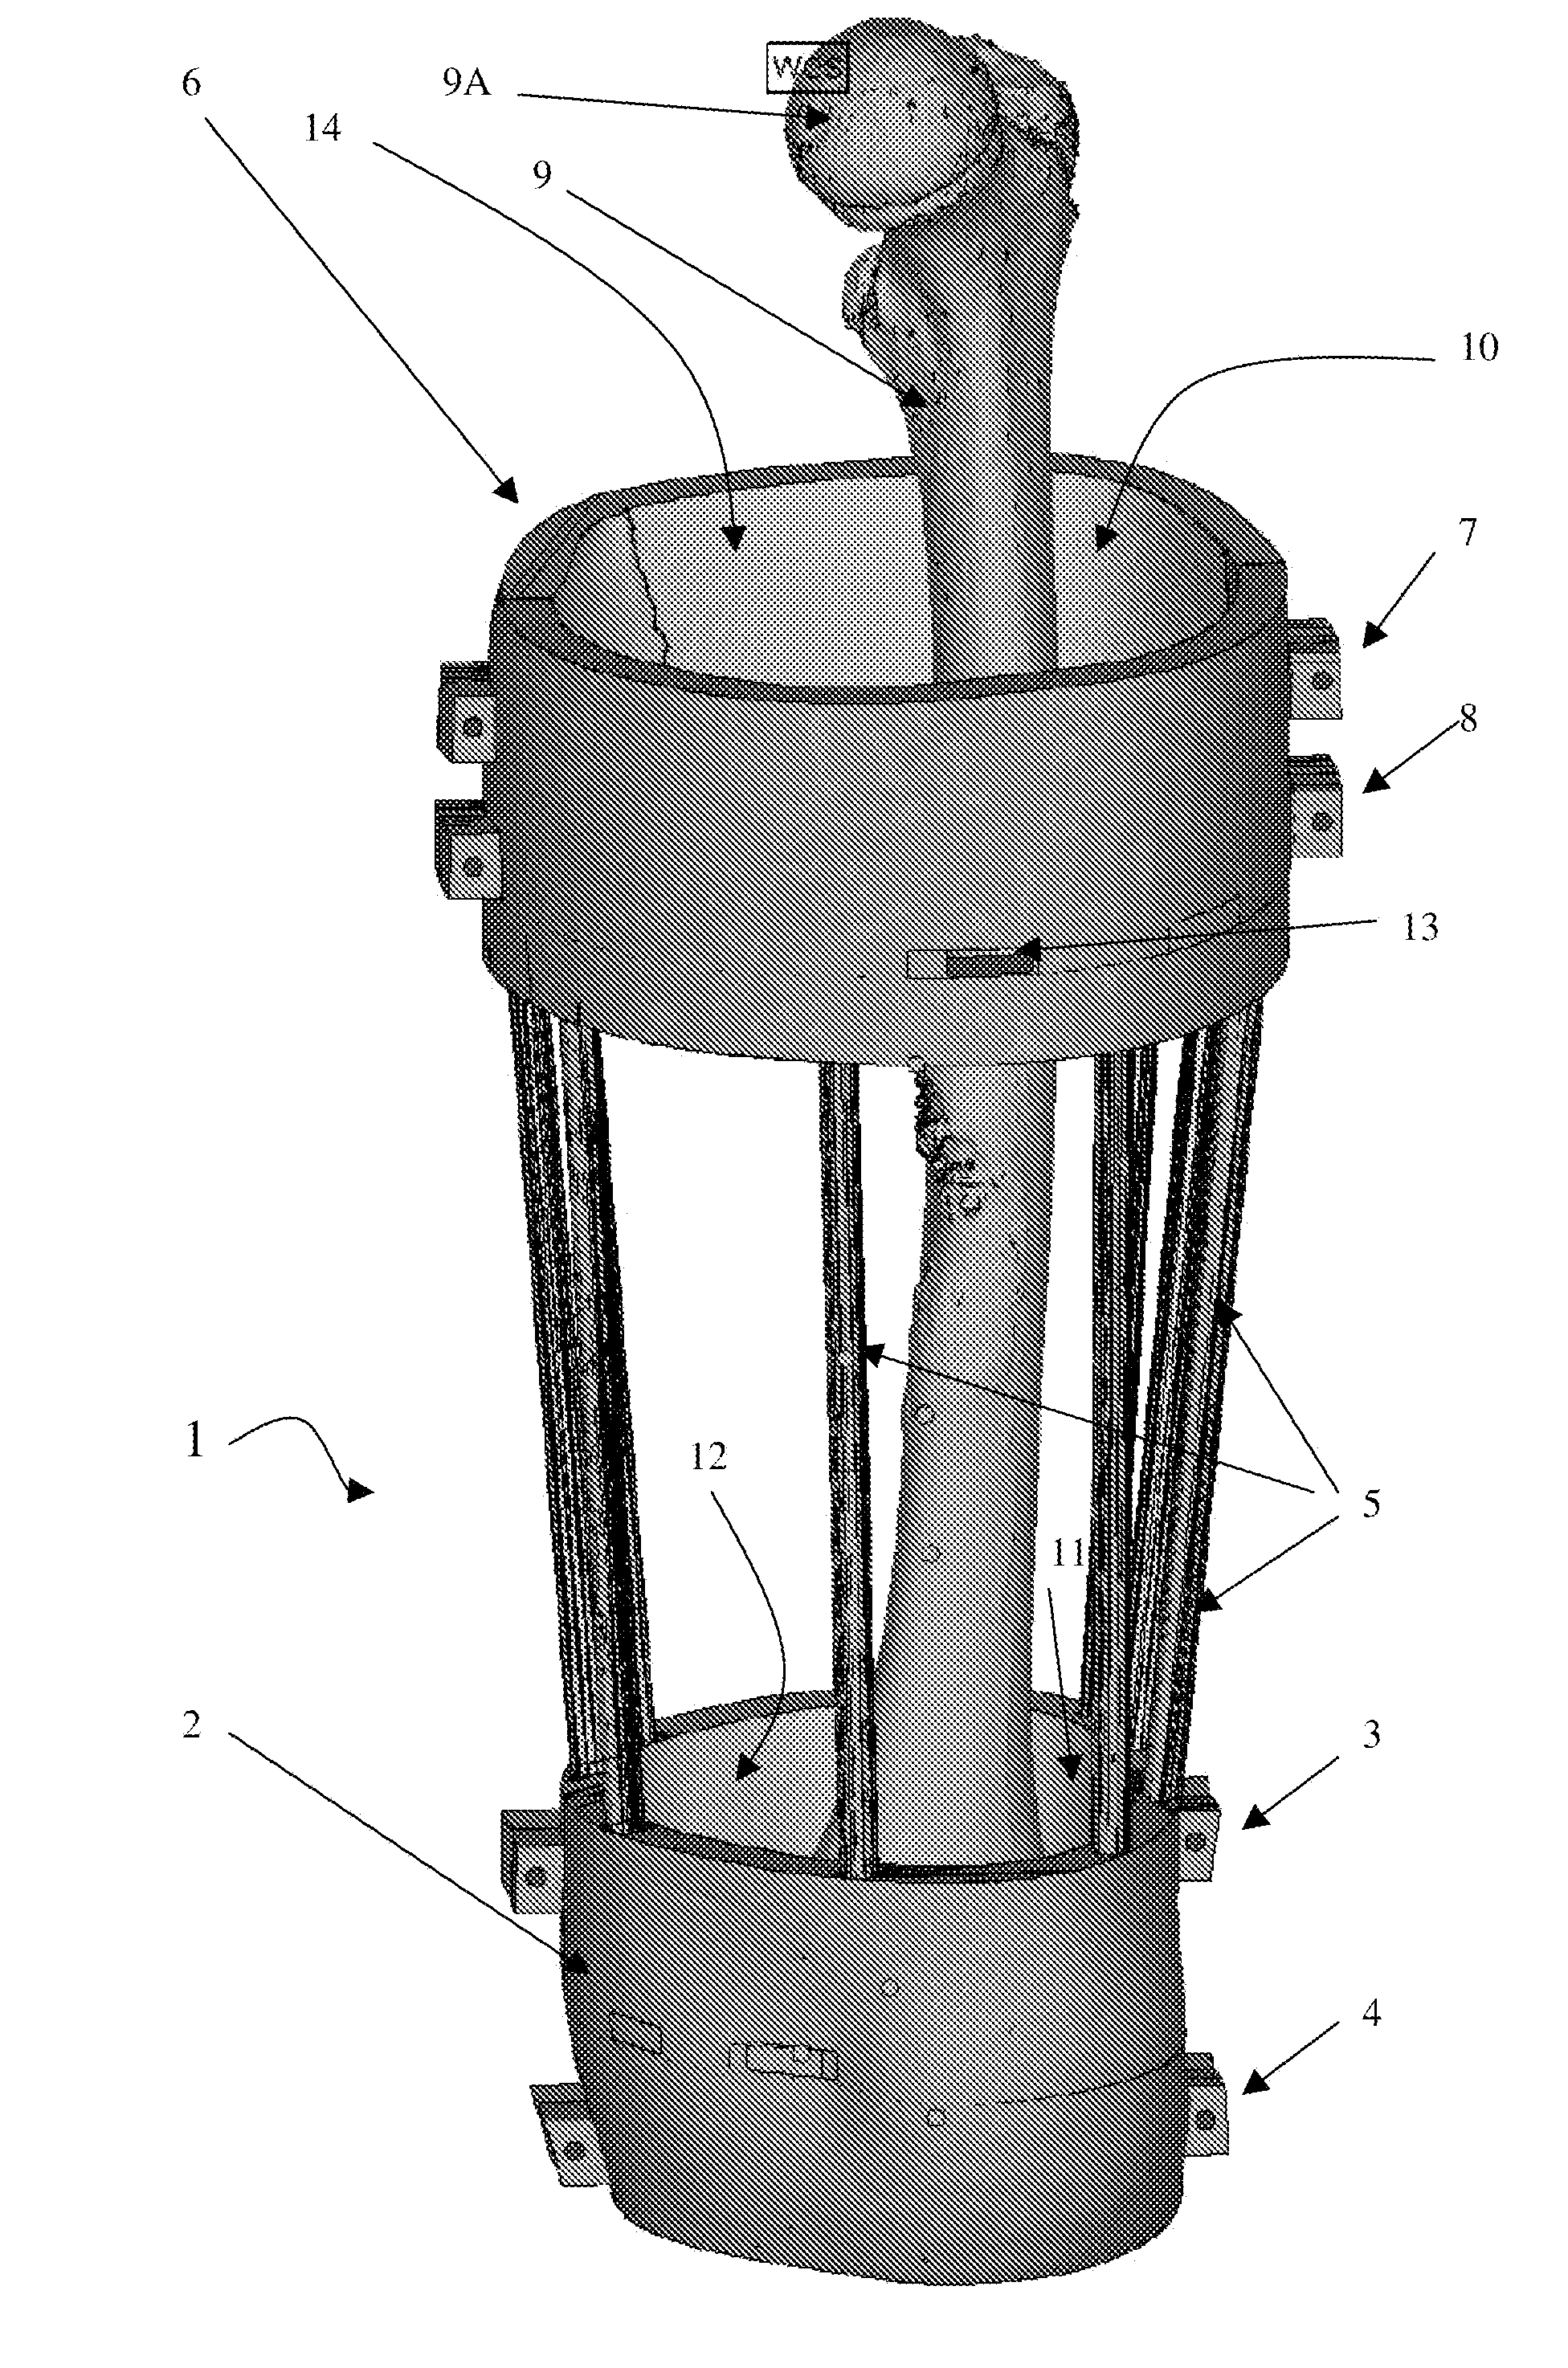 Surgical, therapeutic, or diagnostic tool